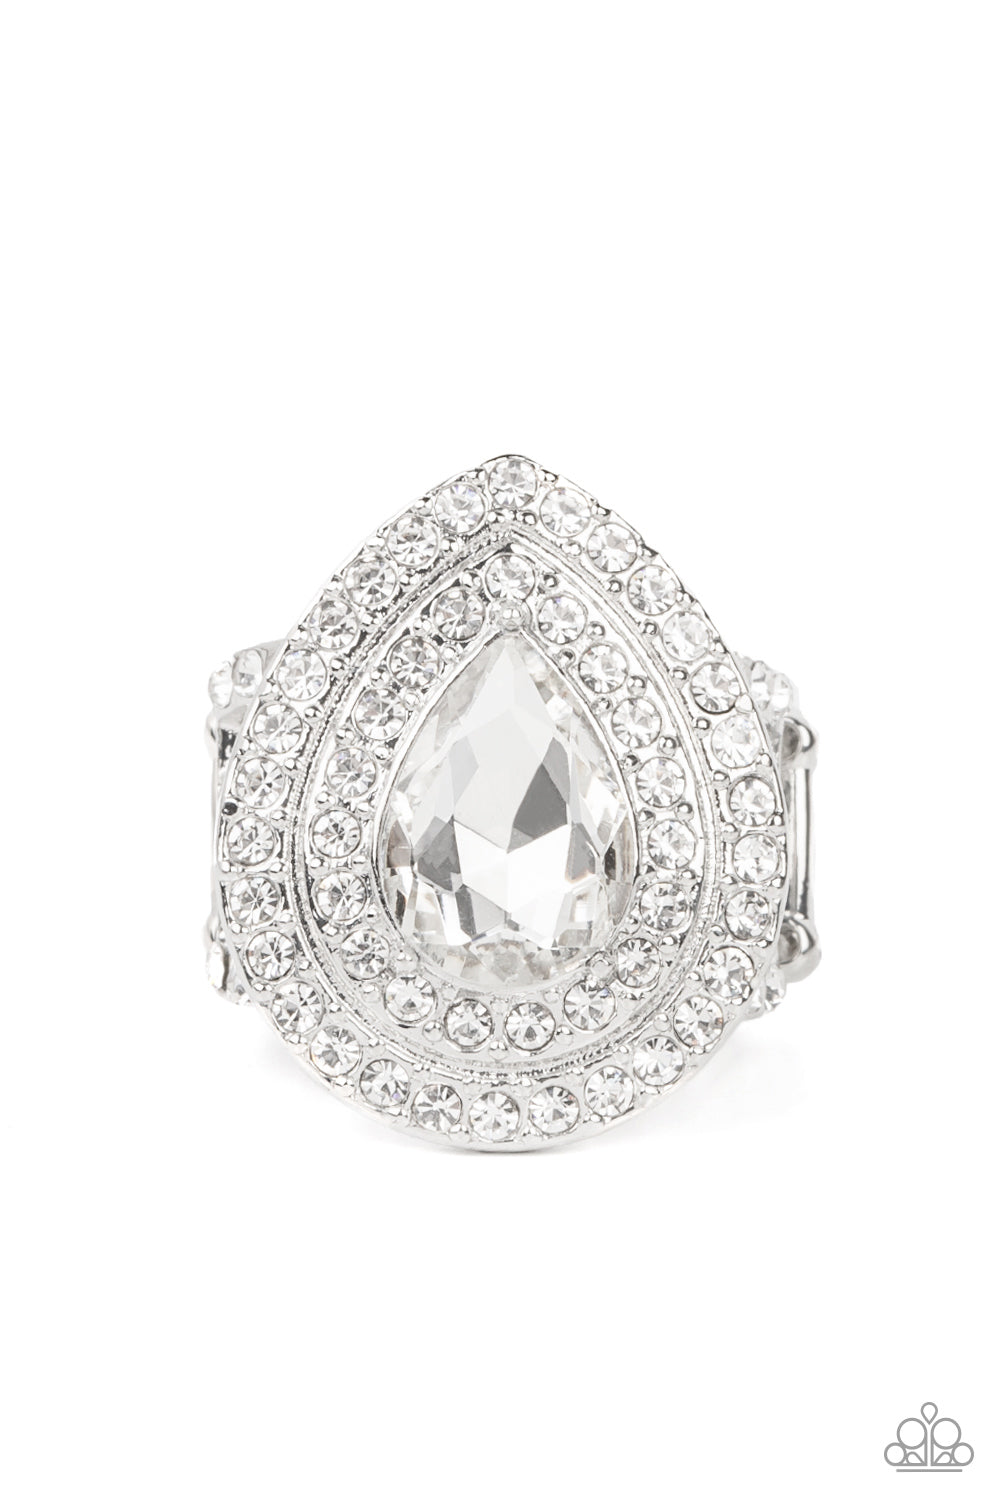 Icy Indulgence White Ring May 2022 Life of the Party Exclusive - Princess Glam Shop